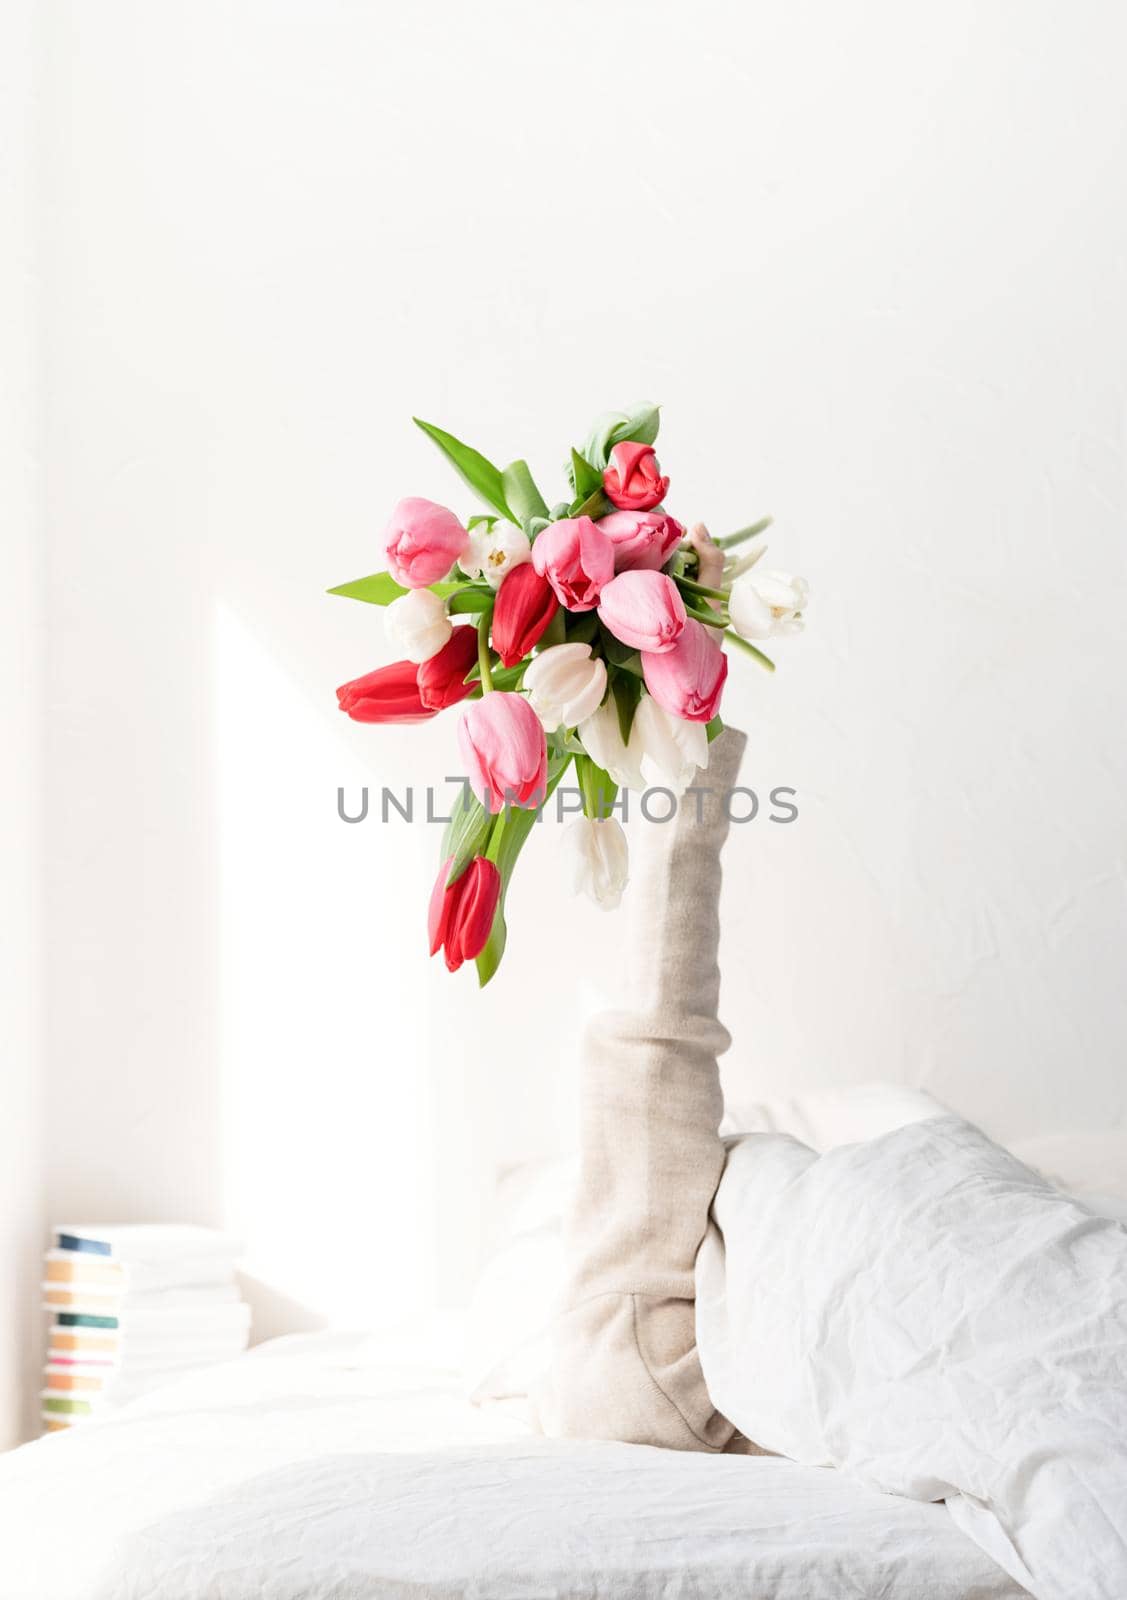 Woman arm outstreched from the blanket holding a bouquet of tulip flowers. Woman in bed holding tulip flowers